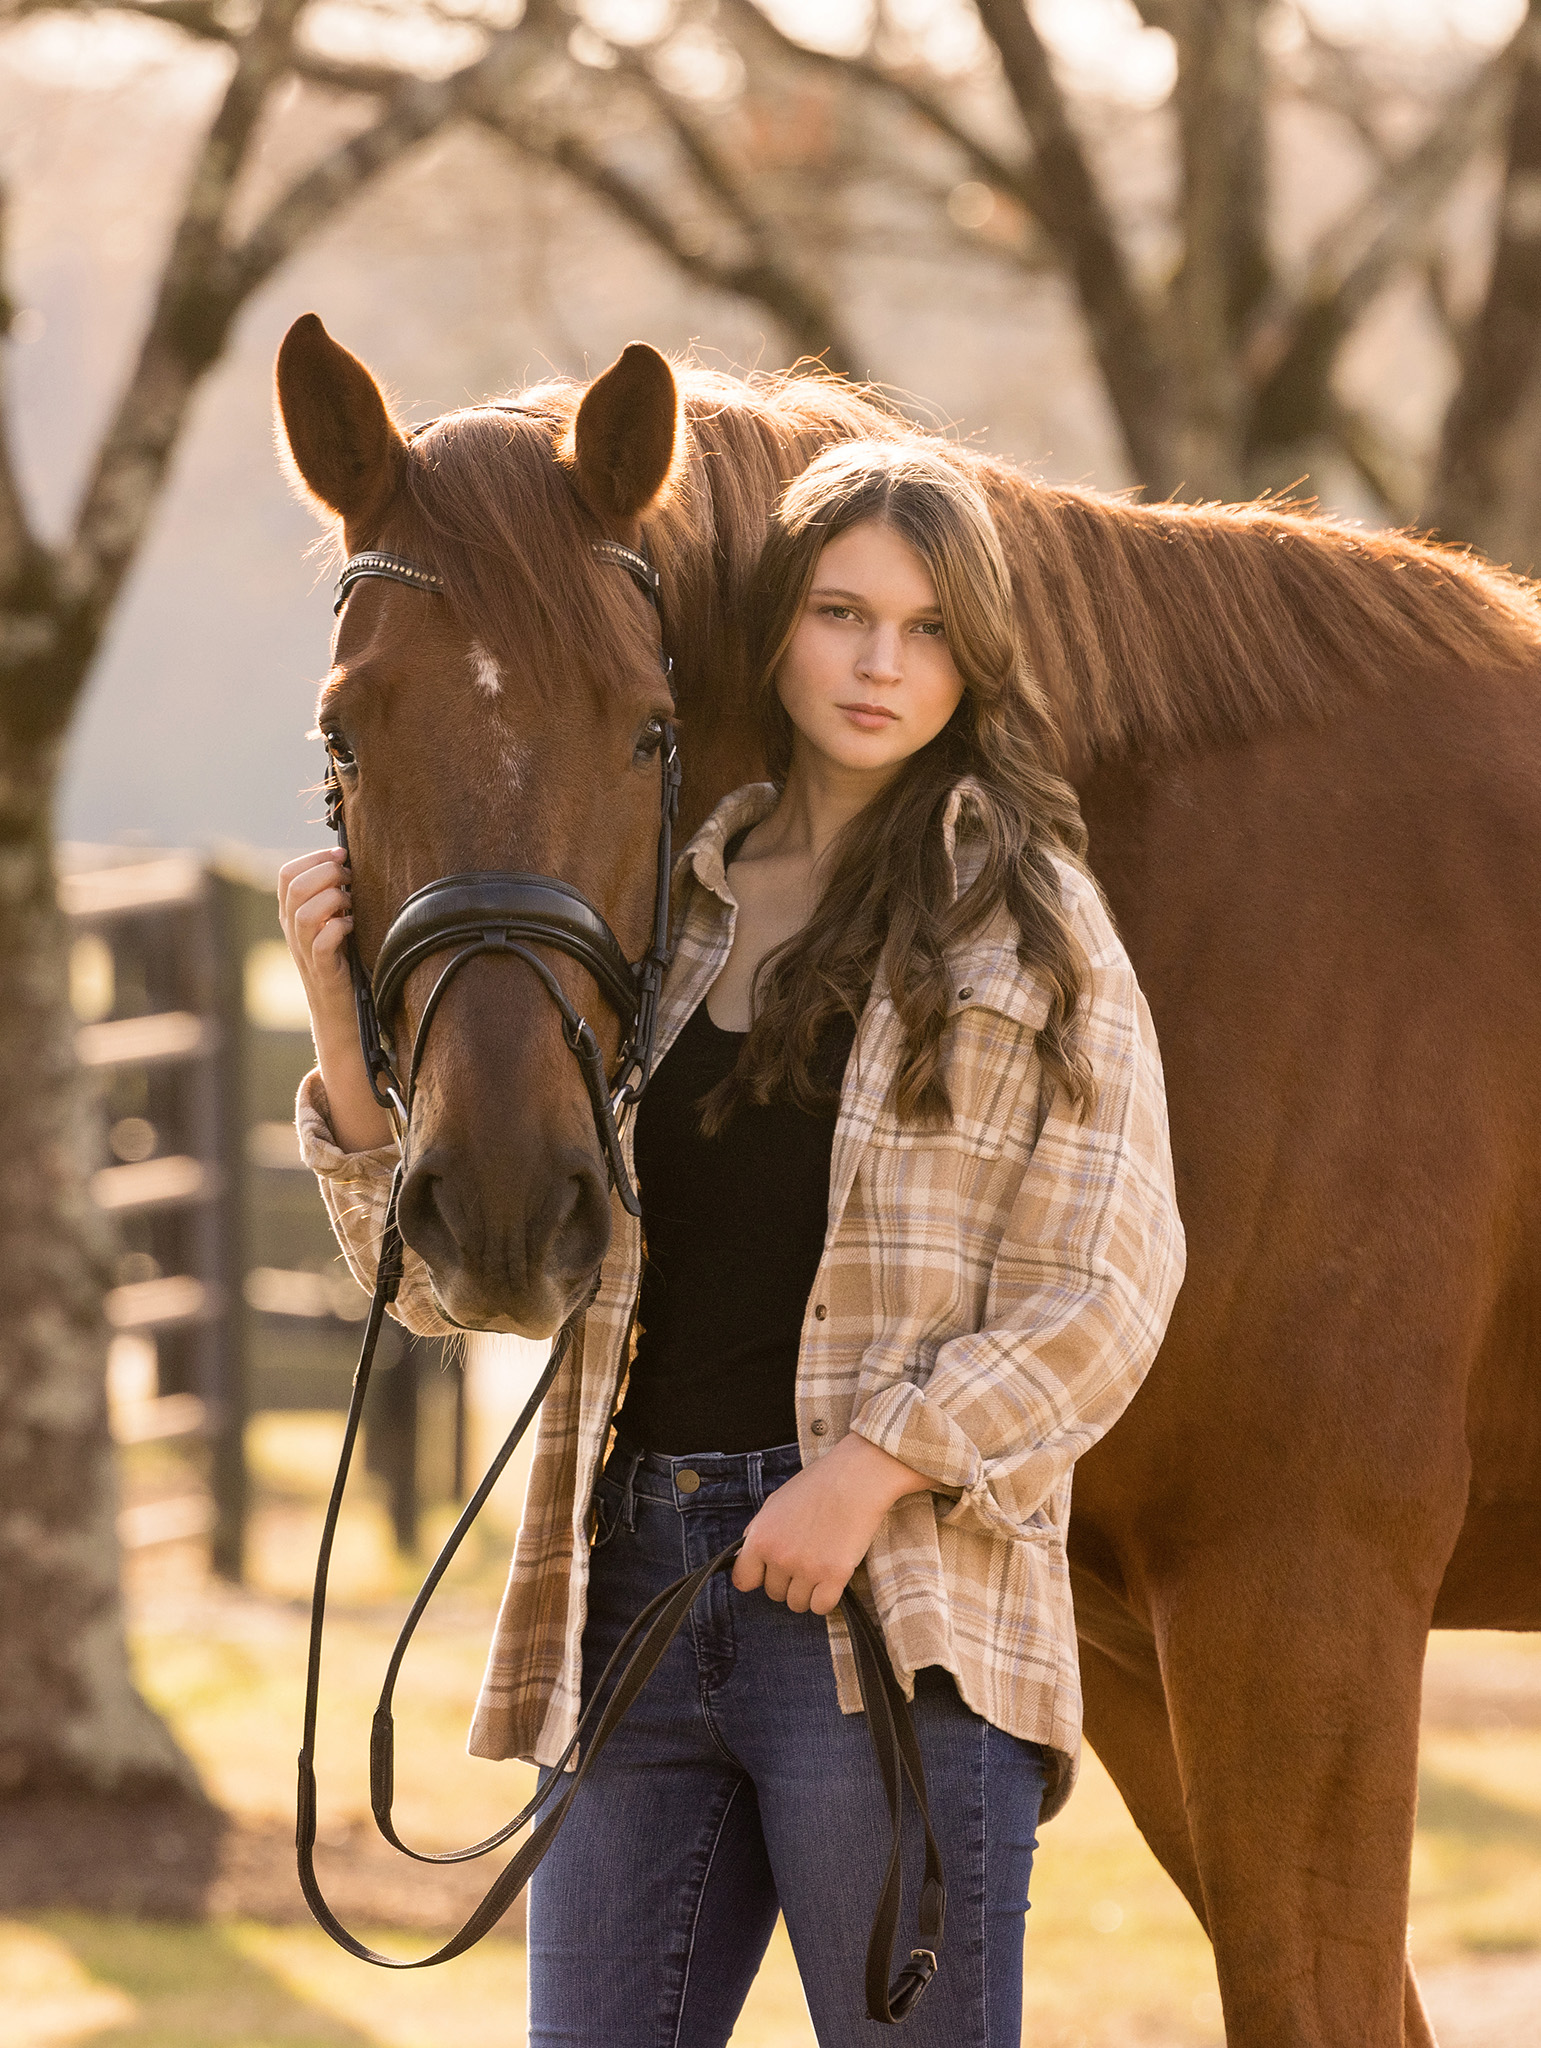 Senior Pictures with your Horse in Chattanooga, TN